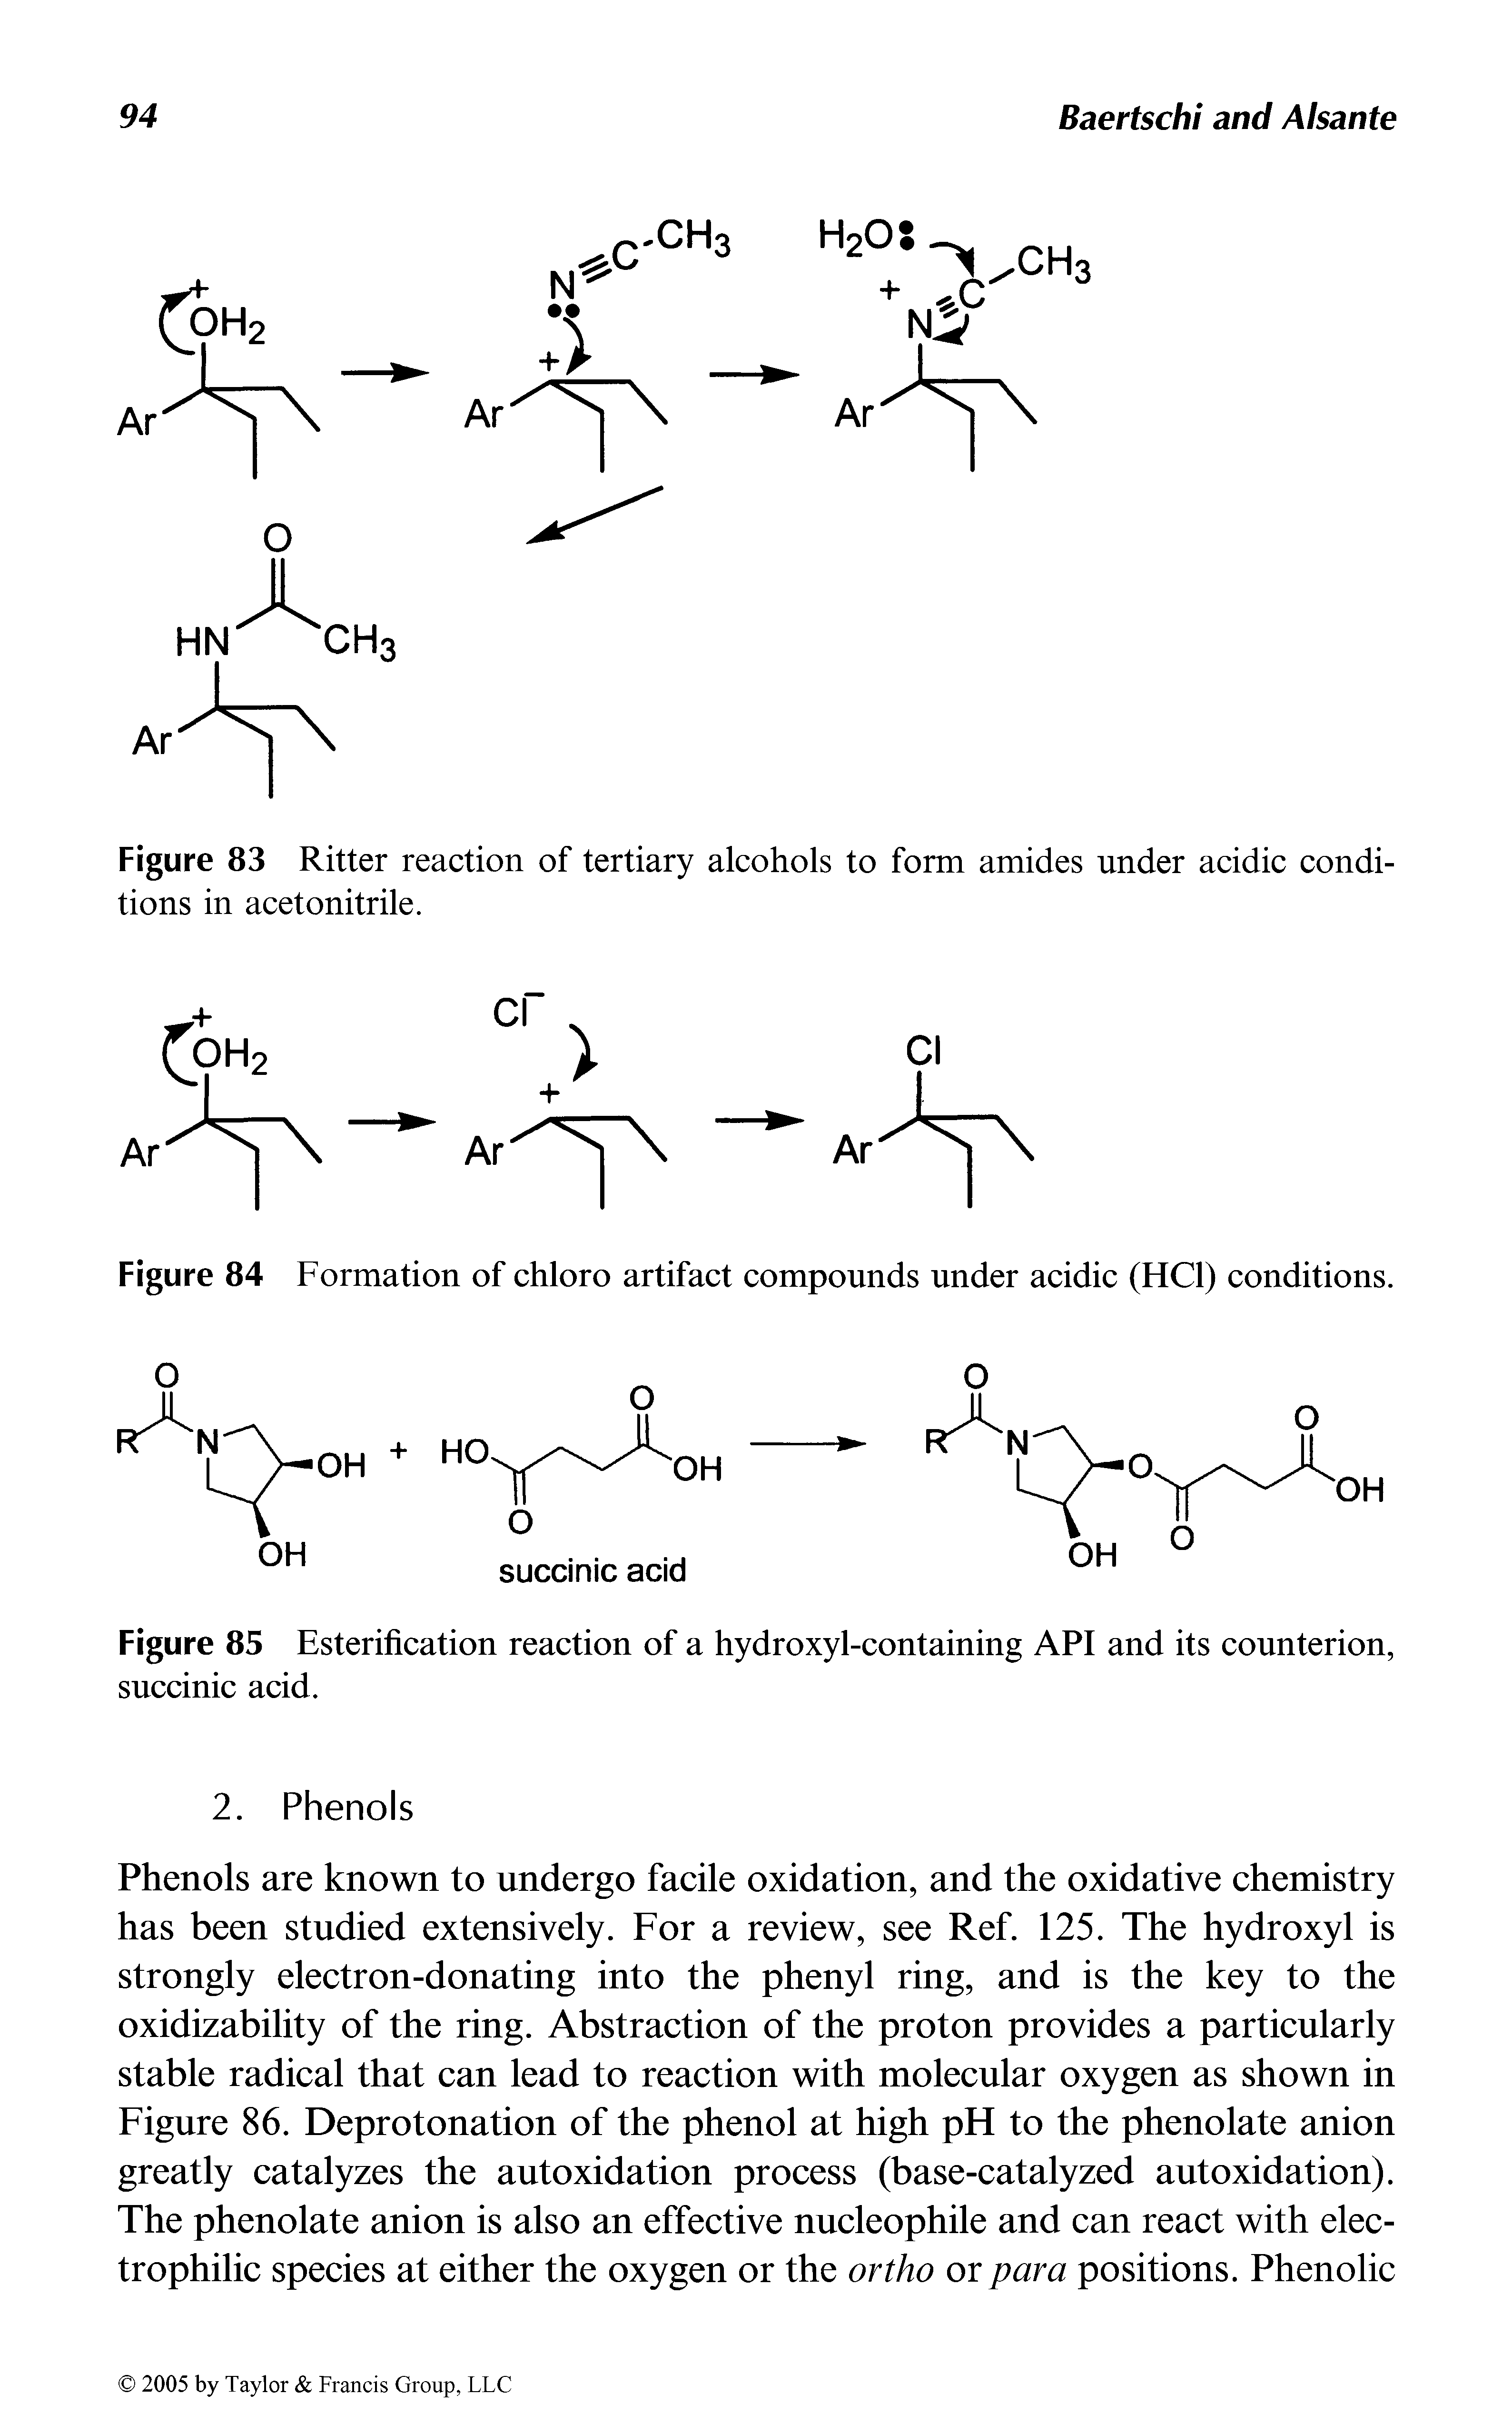 Figure 83 Ritter reaction of tertiary alcohols to form amides under acidic conditions in acetonitrile.